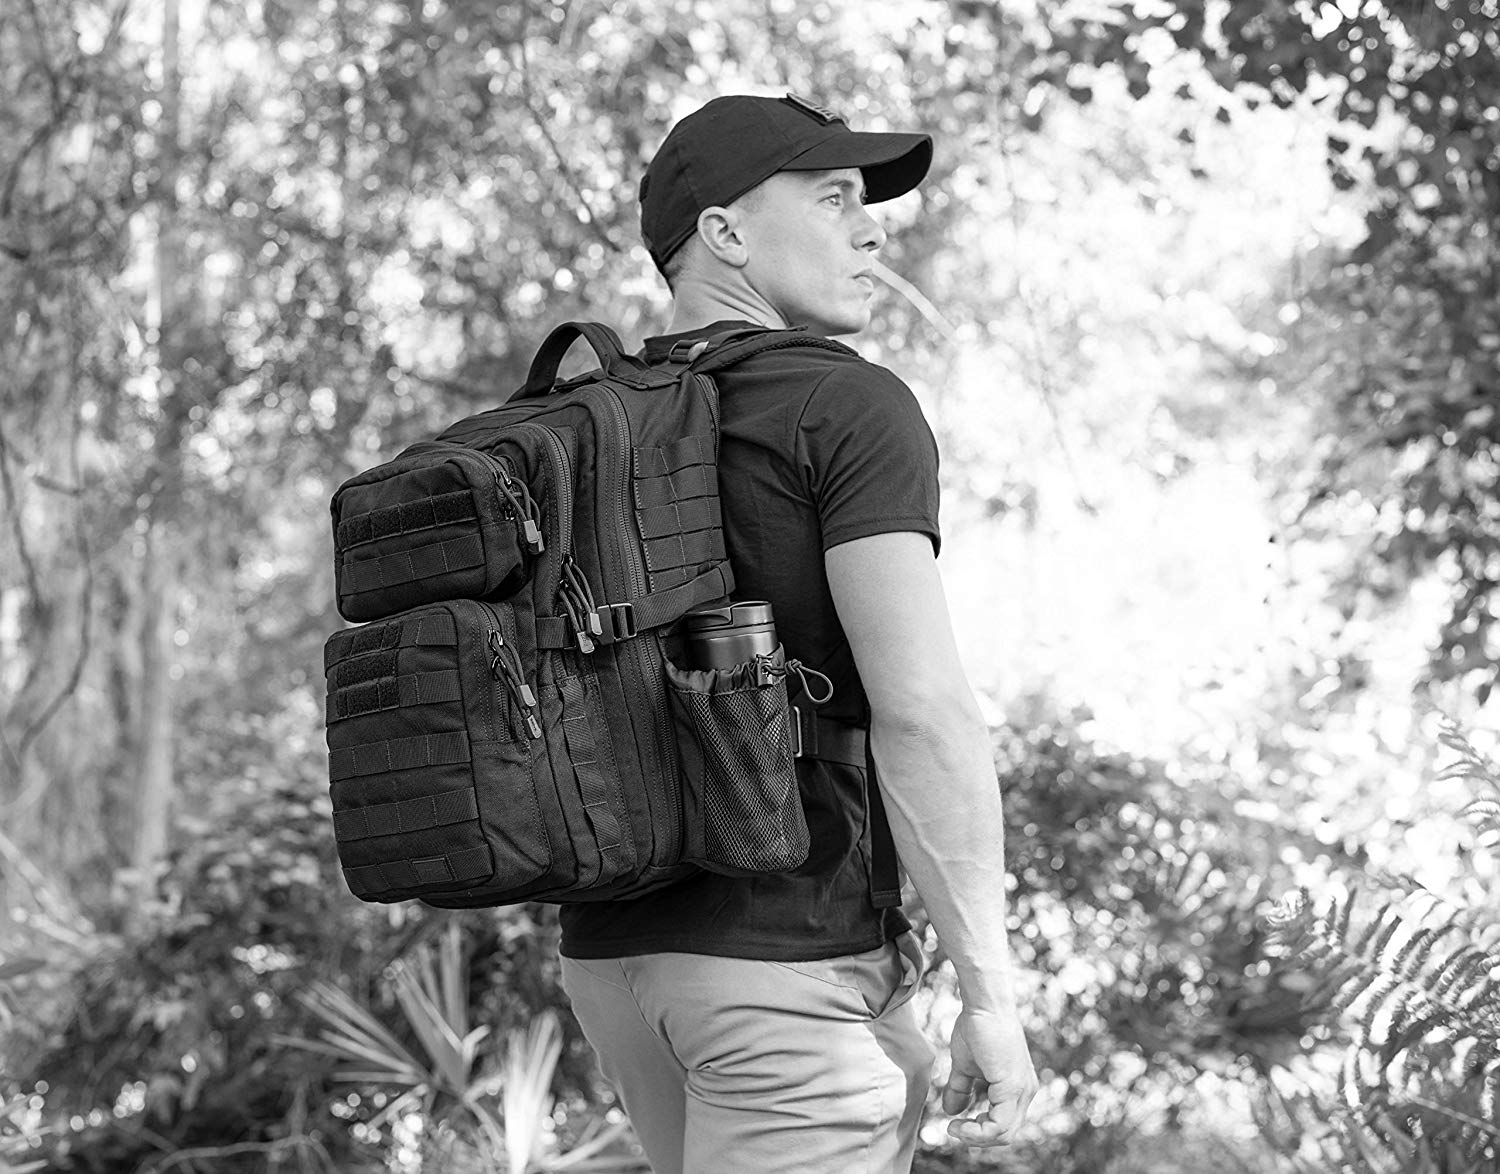 Celebs are loving this Sergeant Tactical Backpack